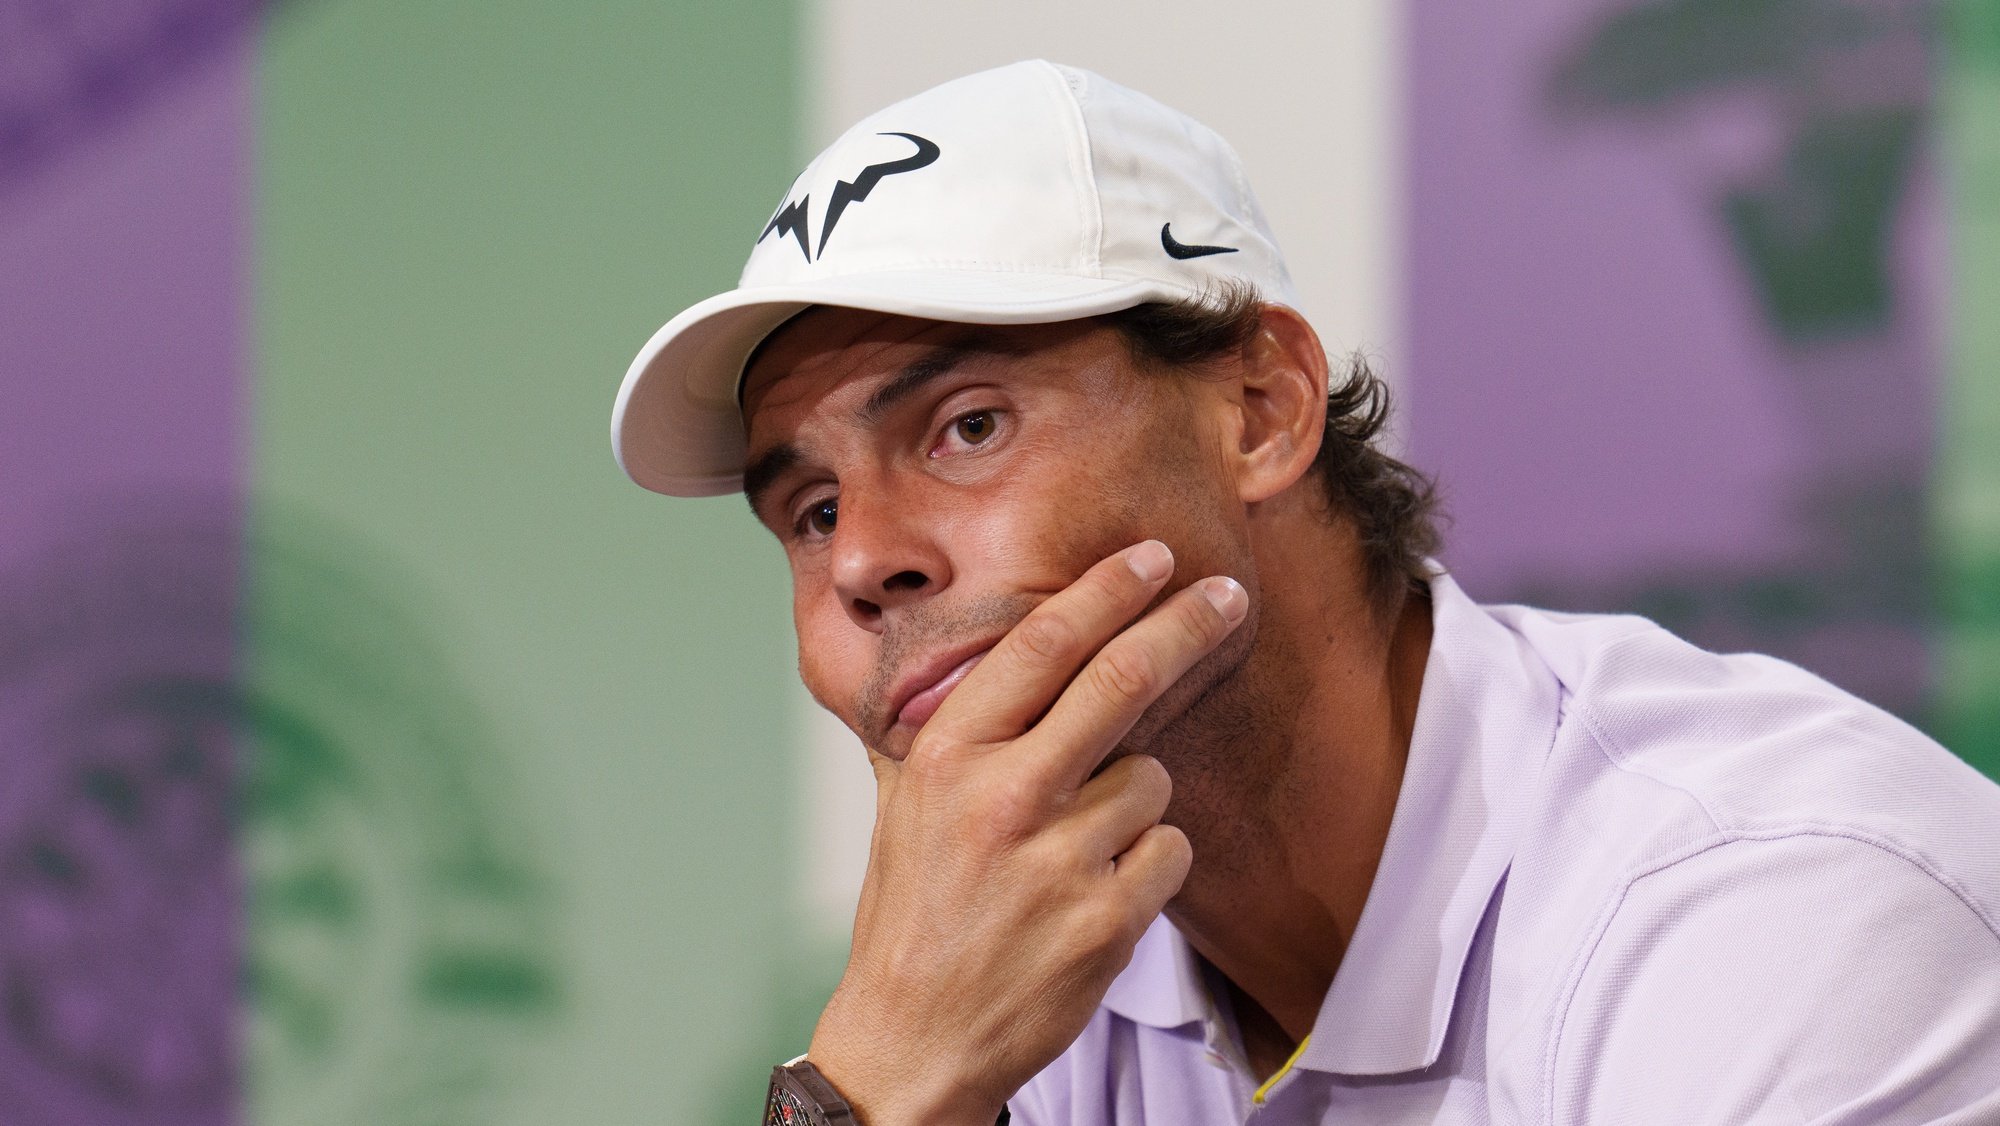 epa10057655 A handout photo made available by AELTC of Rafael Nadal of Spain (R) during a press conference as he announces that he is withdrawing from the men&#039;s singles semi final at the Wimbledon Championships 2022, Wimbledon, Britain, 07 July 2022.  EPA/JOE TOTH  / AELTC HANDOUT  HANDOUT EDITORIAL USE ONLY/NO SALES HANDOUT EDITORIAL USE ONLY/NO SALES